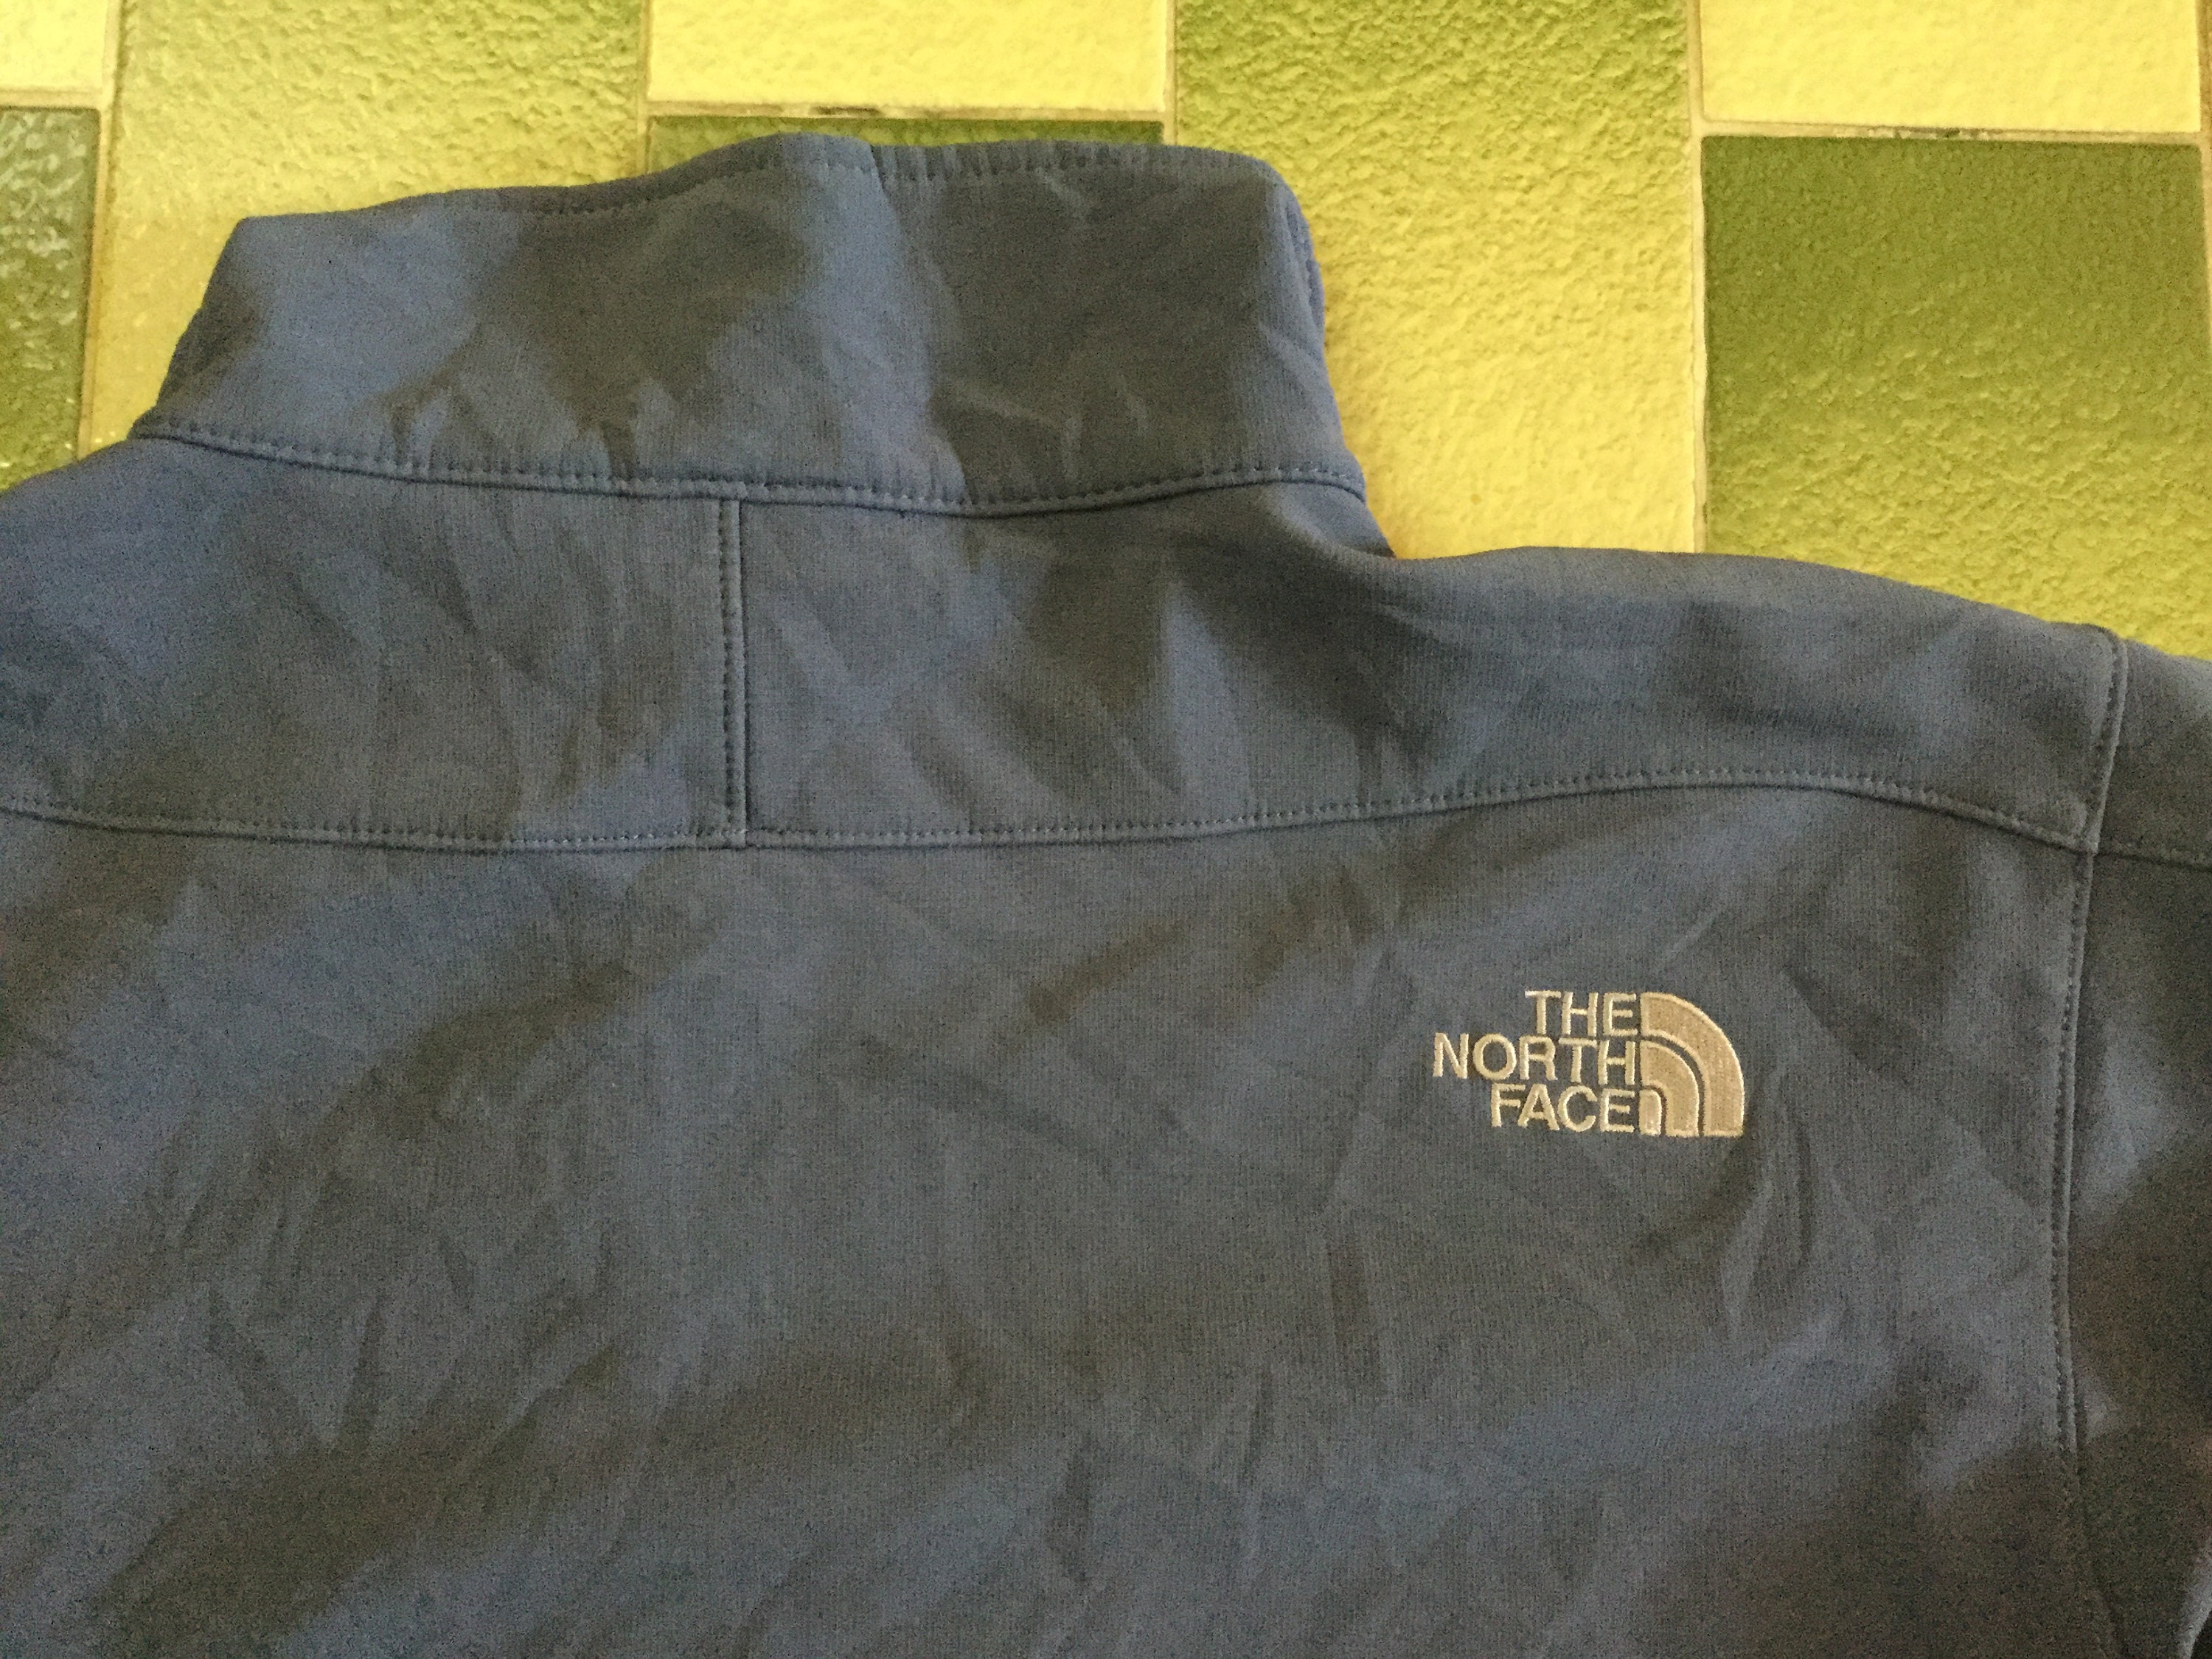 The North Face Apex Full Zip Jacket Size M Outerwear Jacket - Etsy